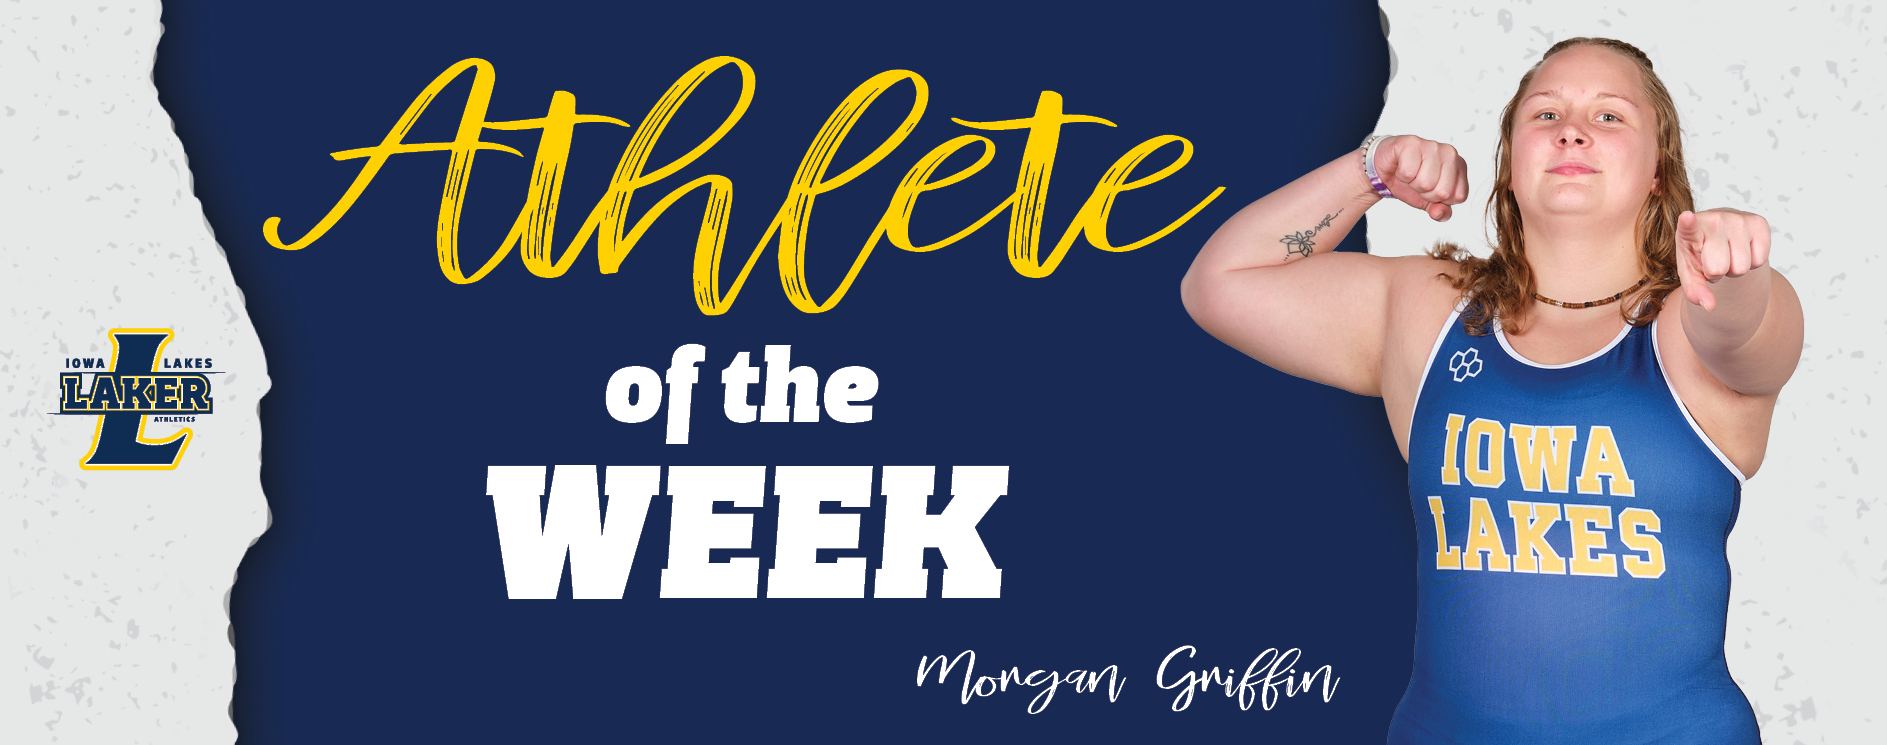 Morgan Griffin Awarded Athlete of the Week Honors